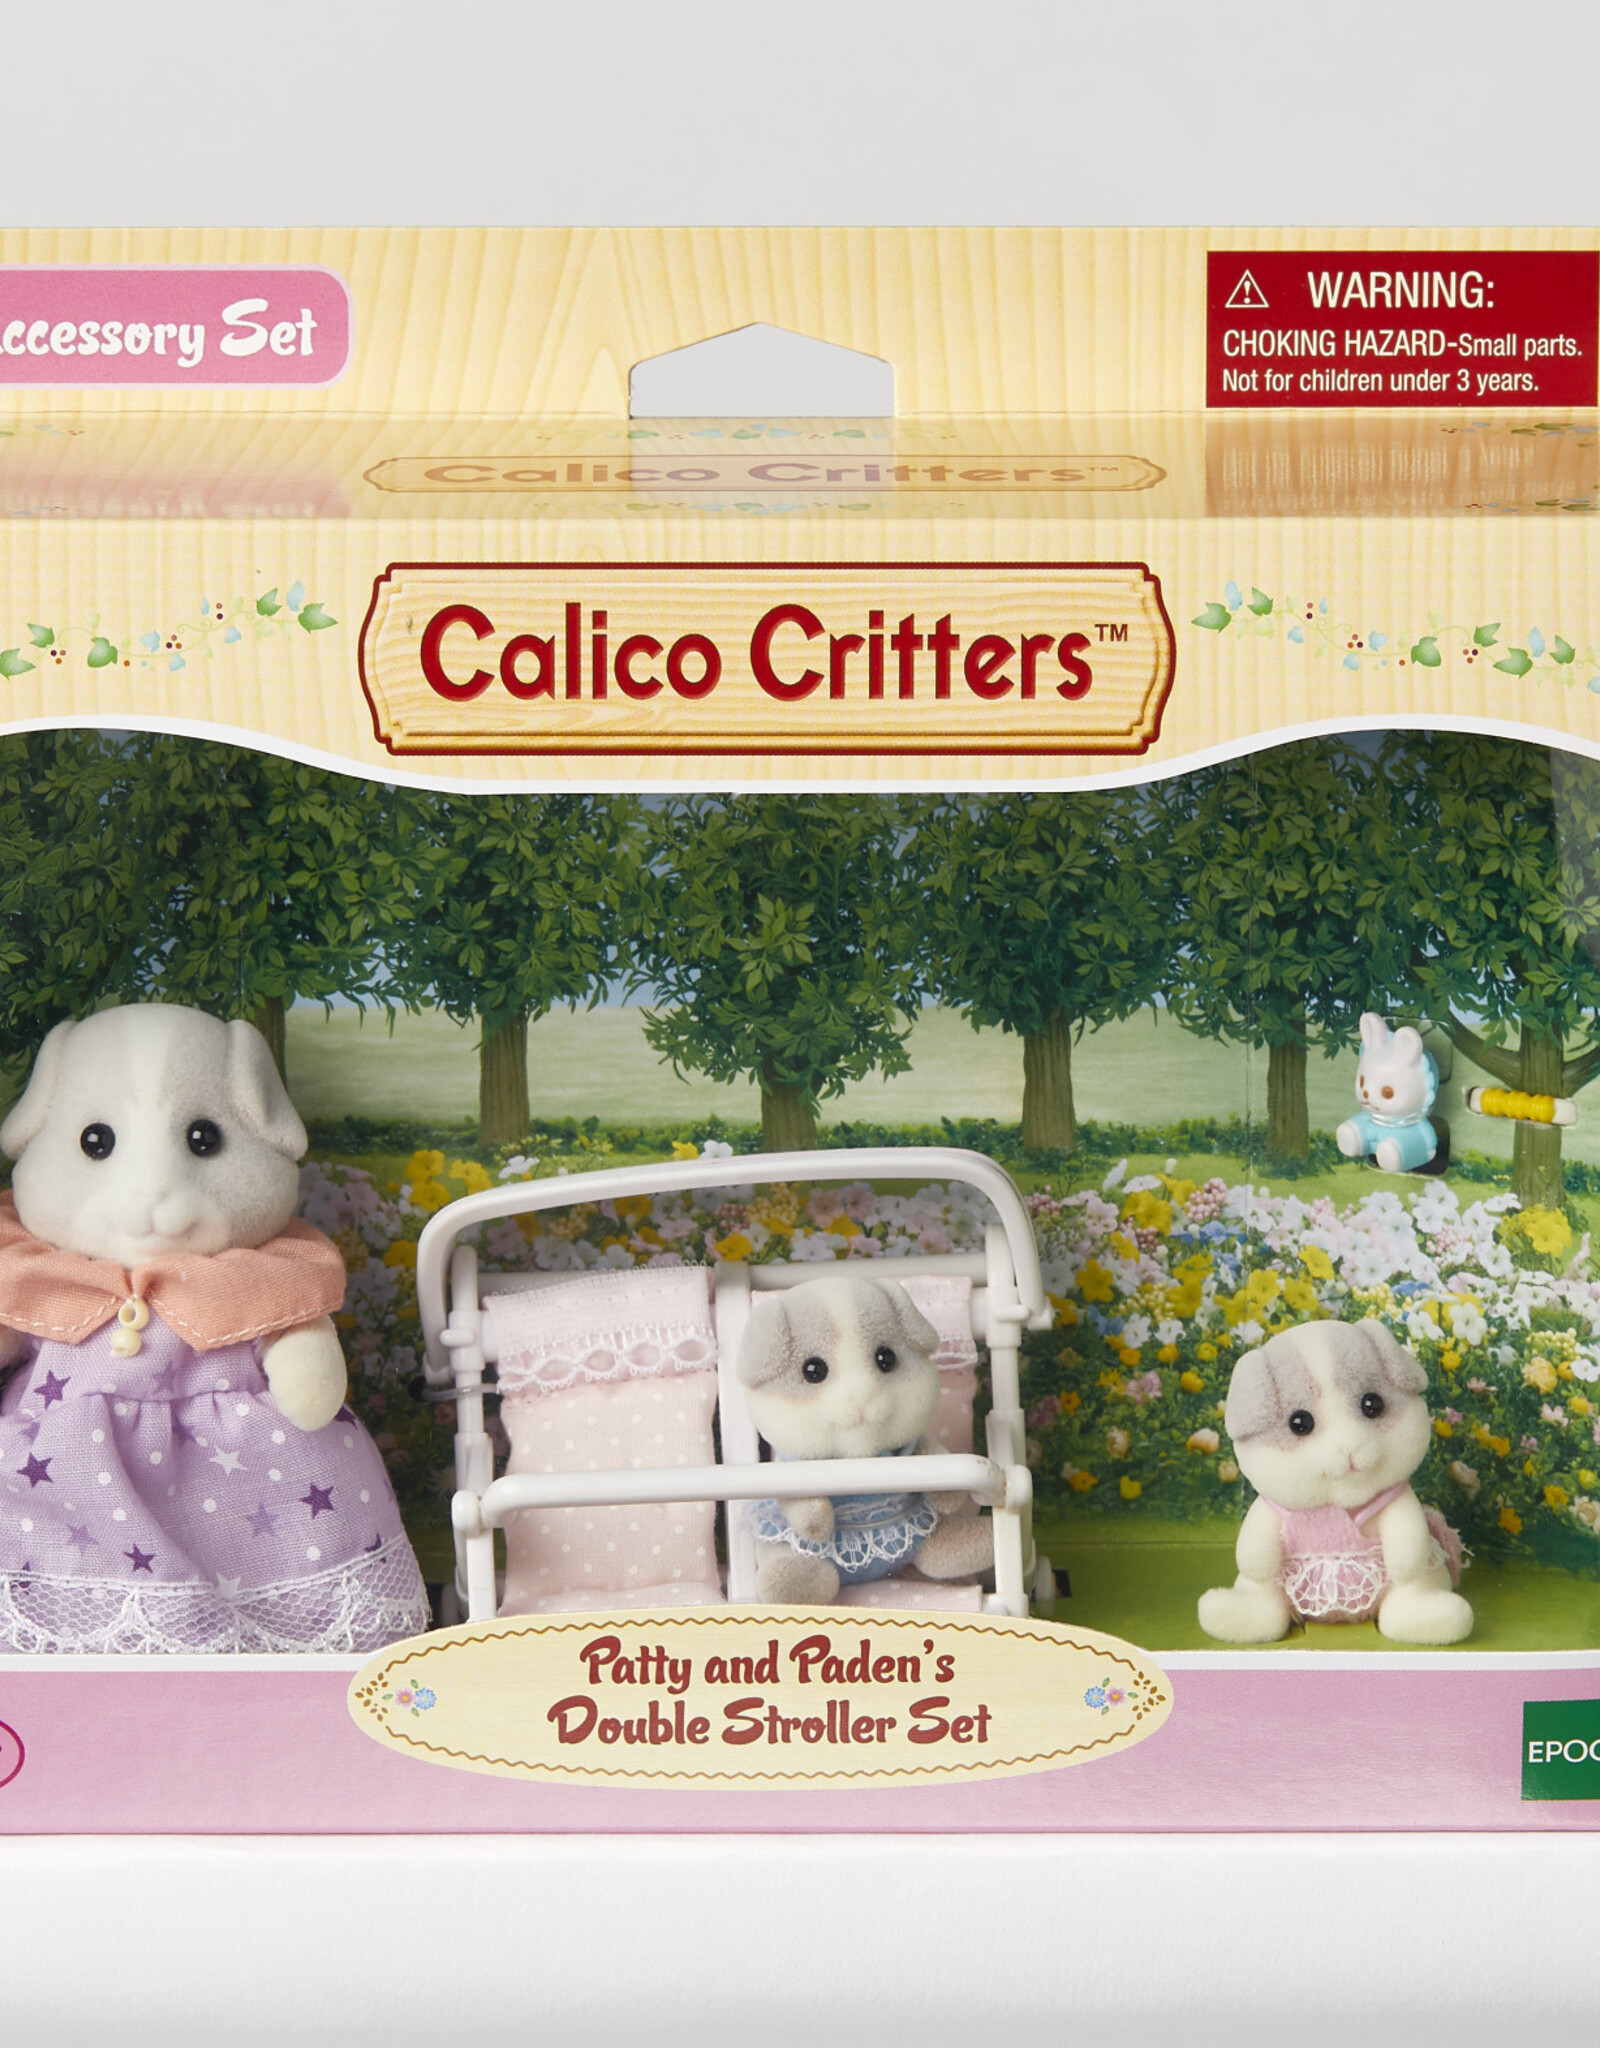 Calico Critters DOUBLE STROLLER SET